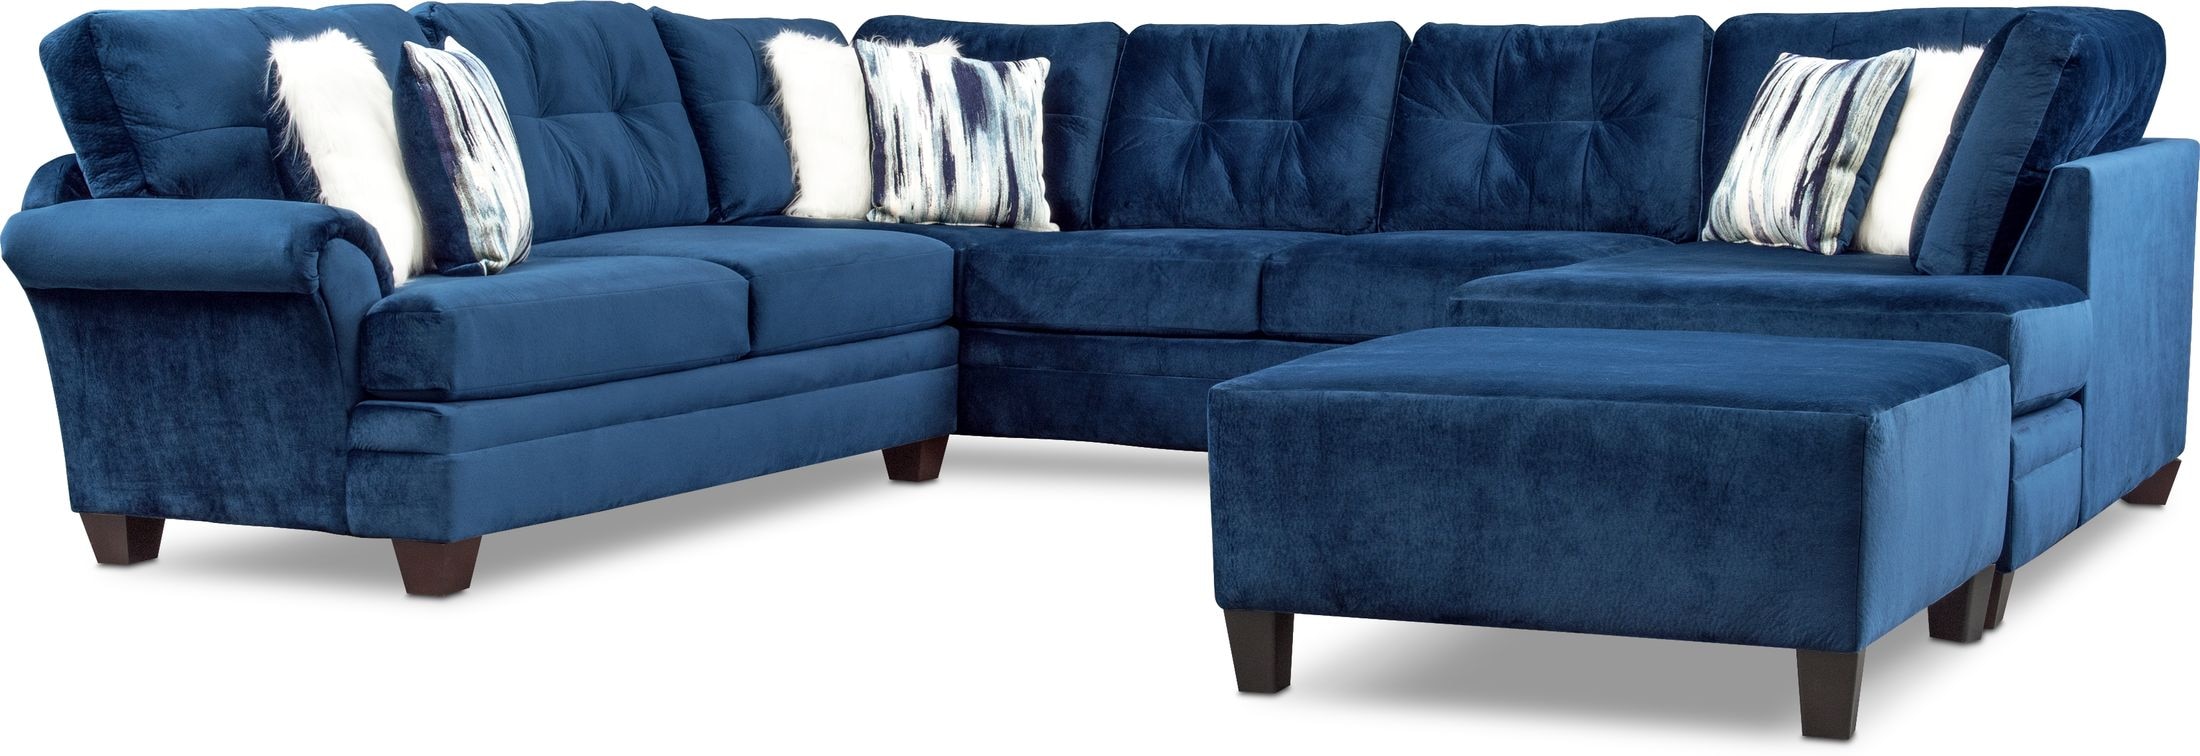 Cordelle 3-Piece Sectional with Chaise and Ottoman